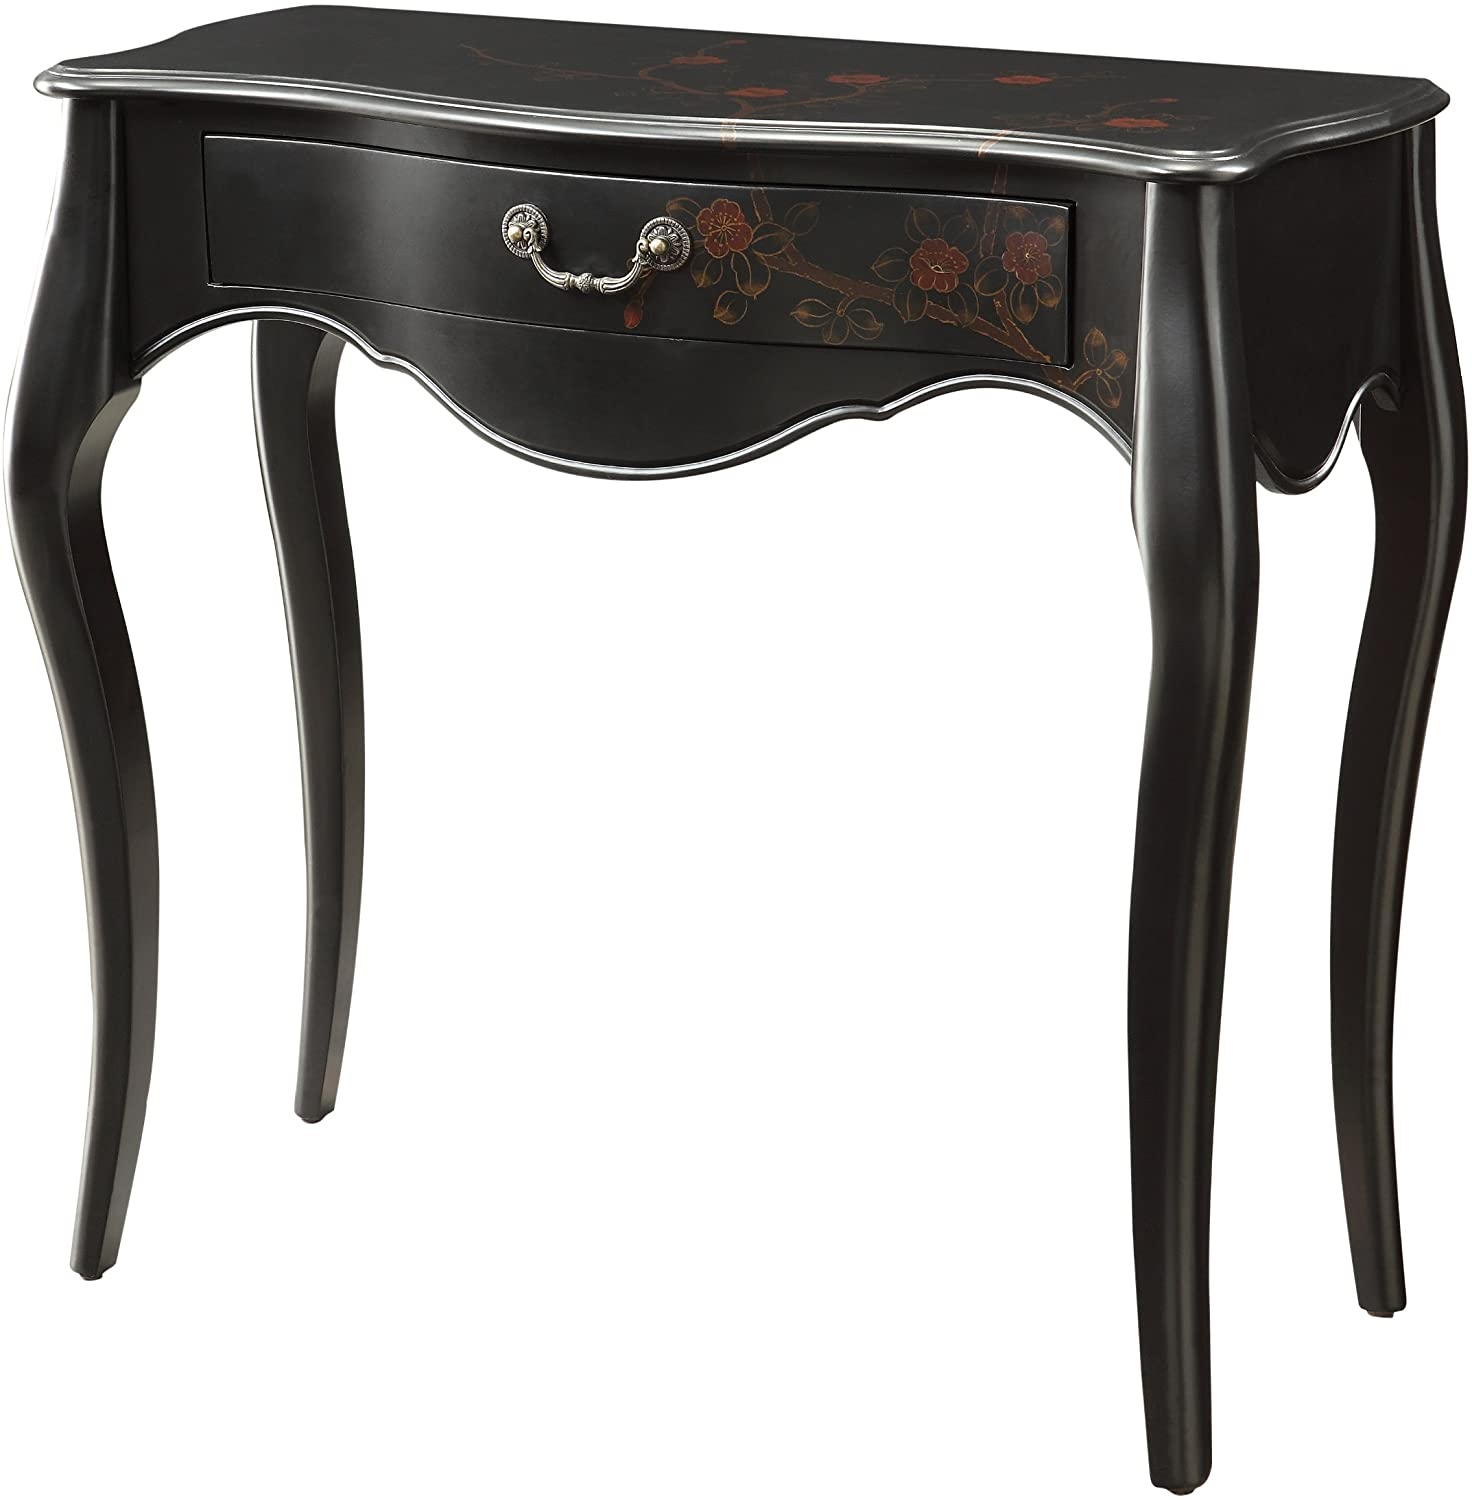 Queen anne console table 8